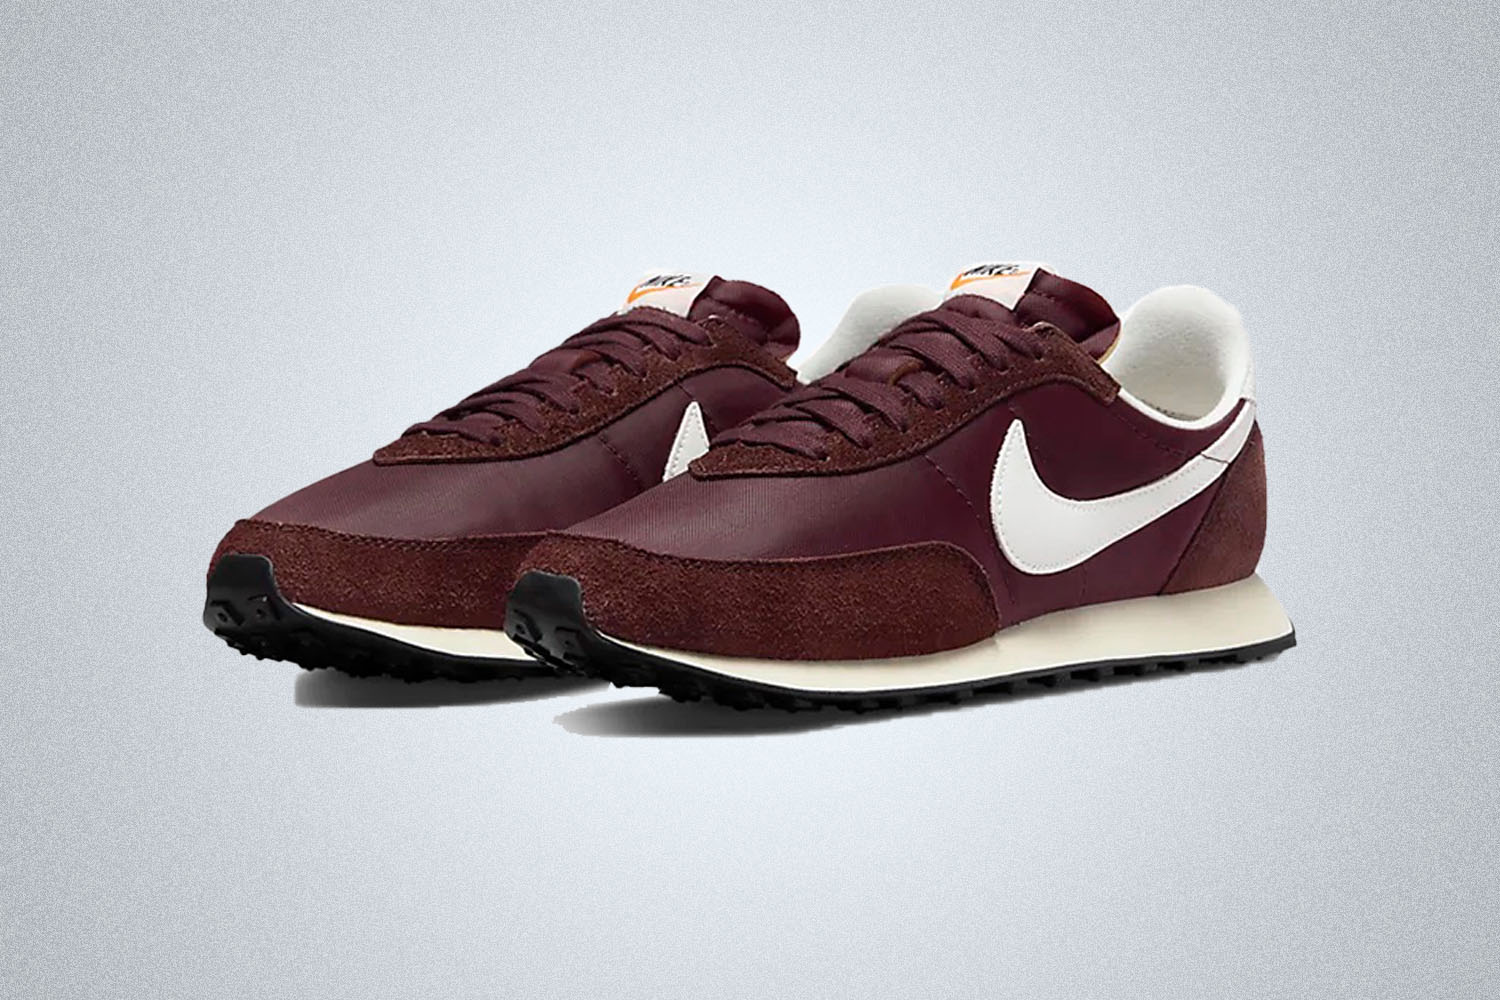 a pair of burgundy and white Nike retro sneakers on a grey background